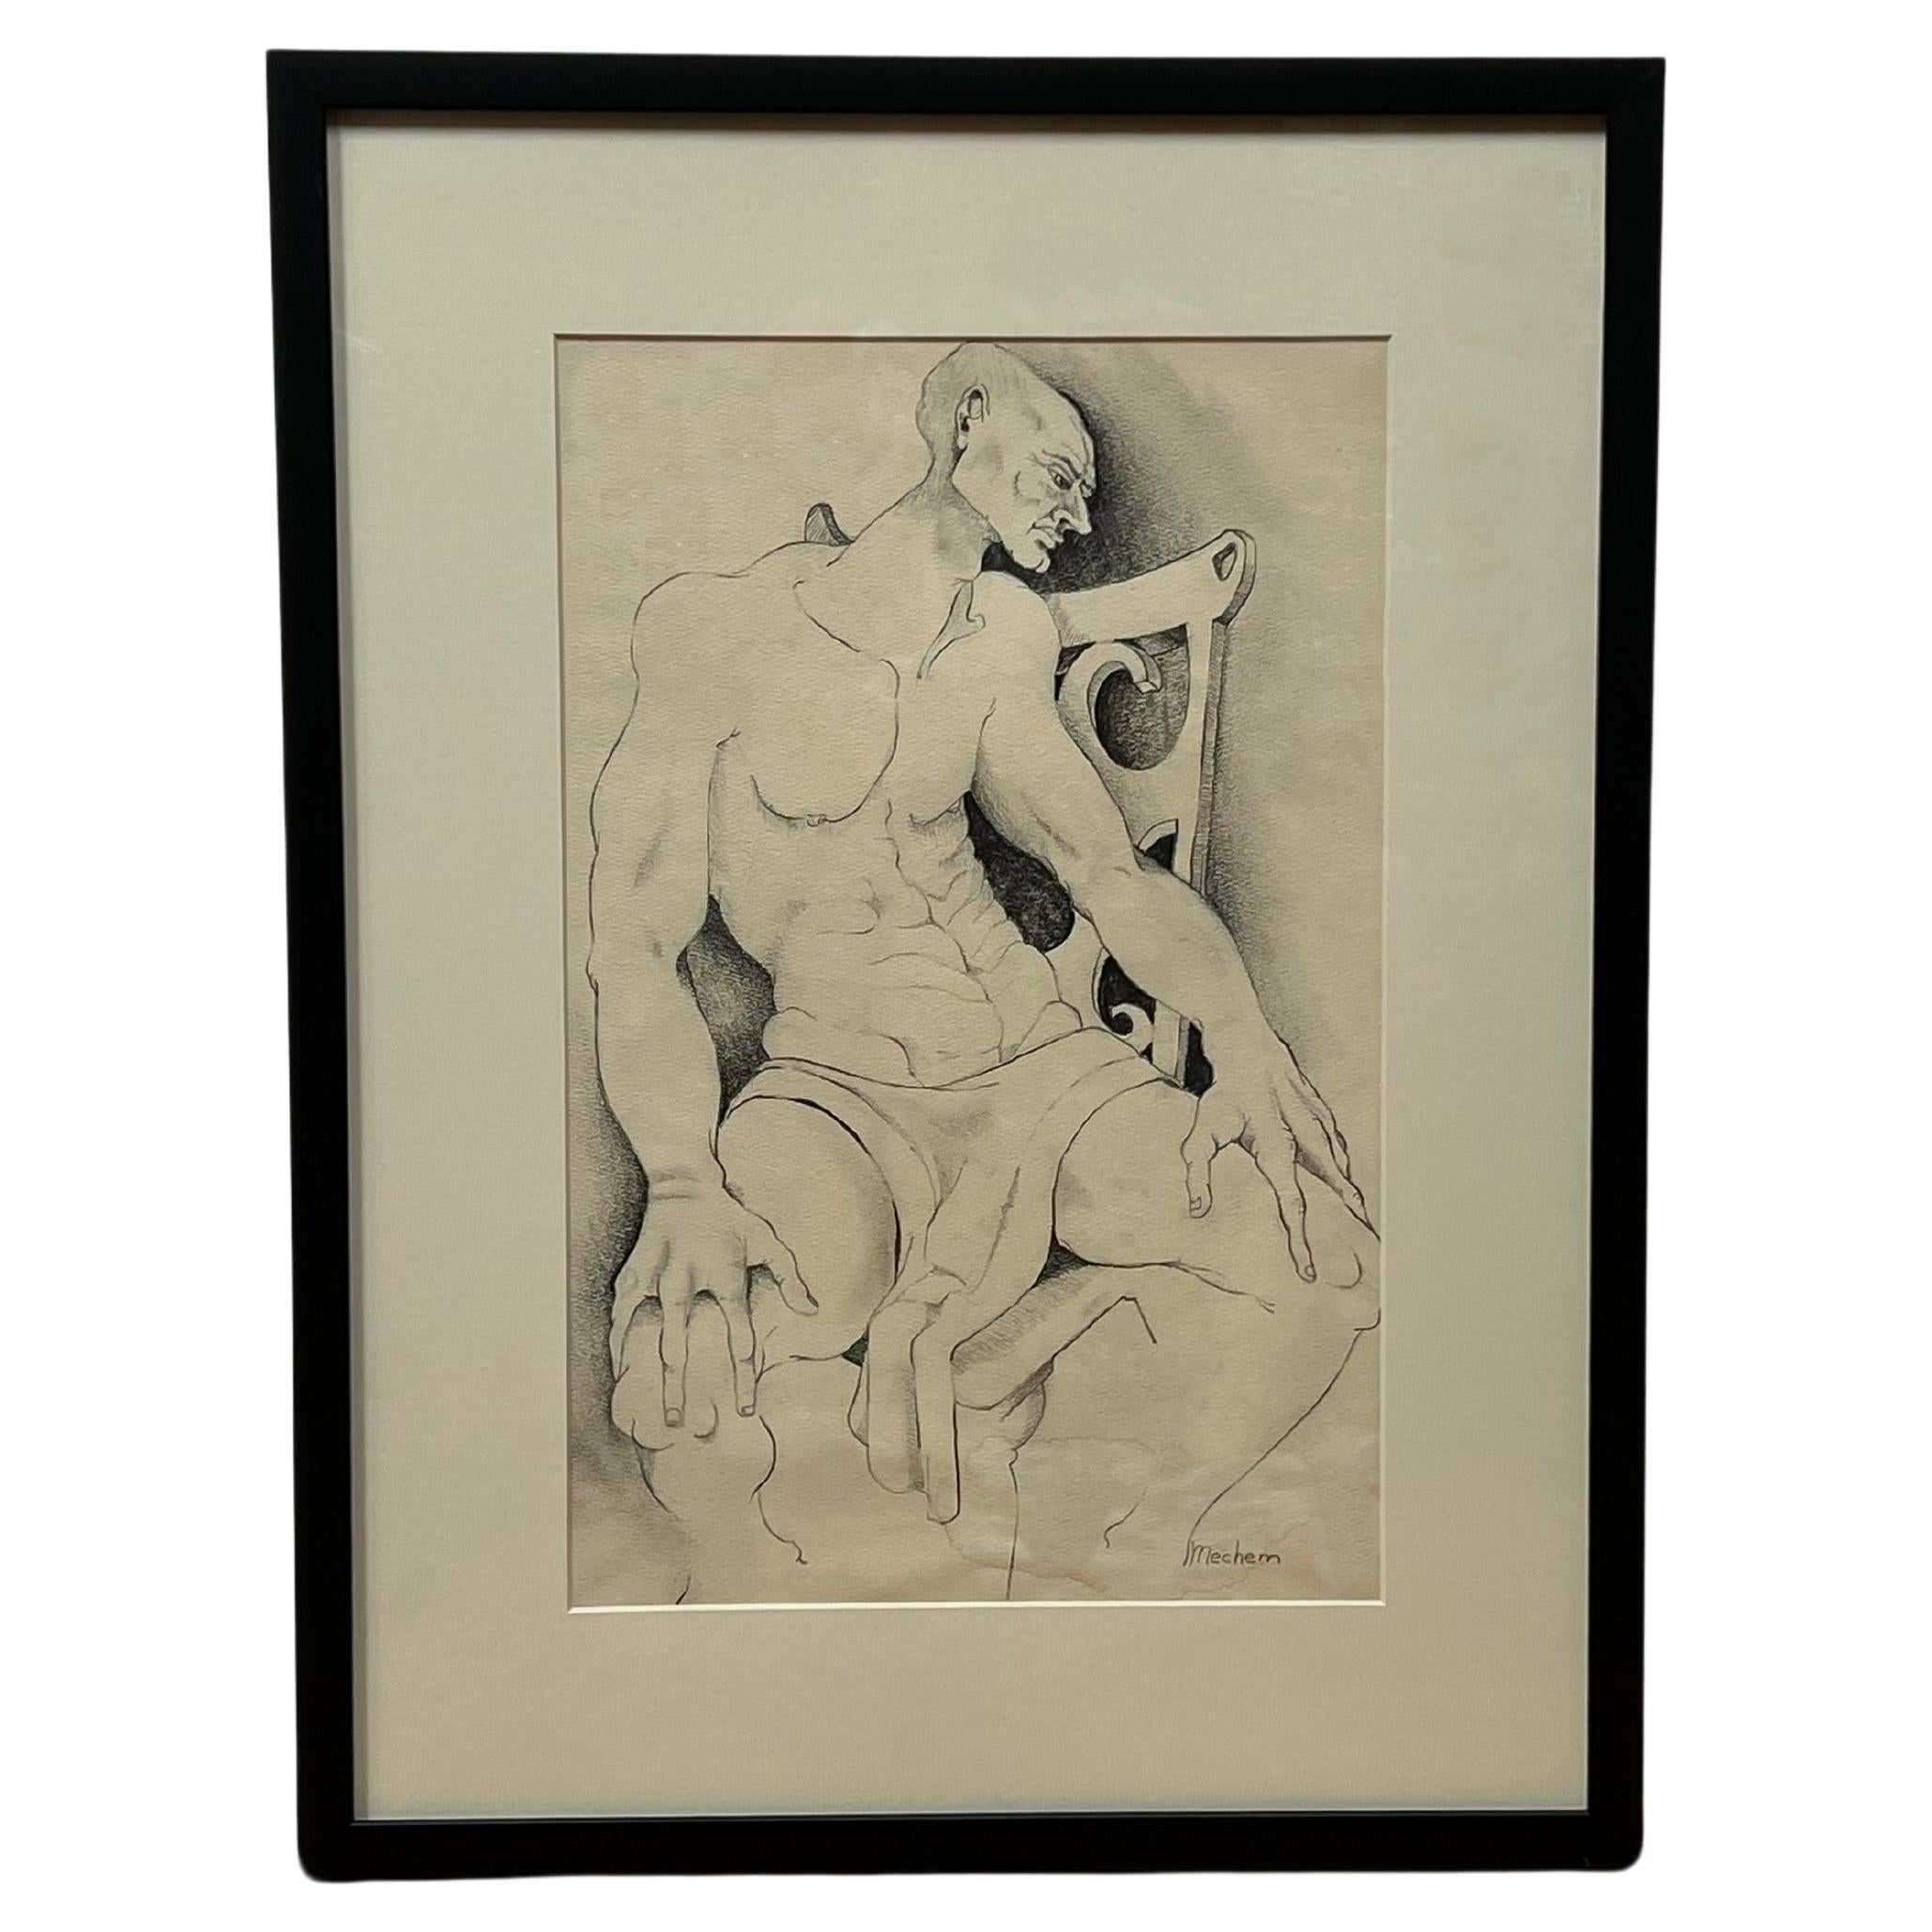 This Mac Mechem's drawing features a seated nude man draped in a small loincloth. Sitting in a wood-crafted chair, his gaze fixed downward as though he were brooding over some bad news. Despite the defeatist posture, his physique radiates a stark